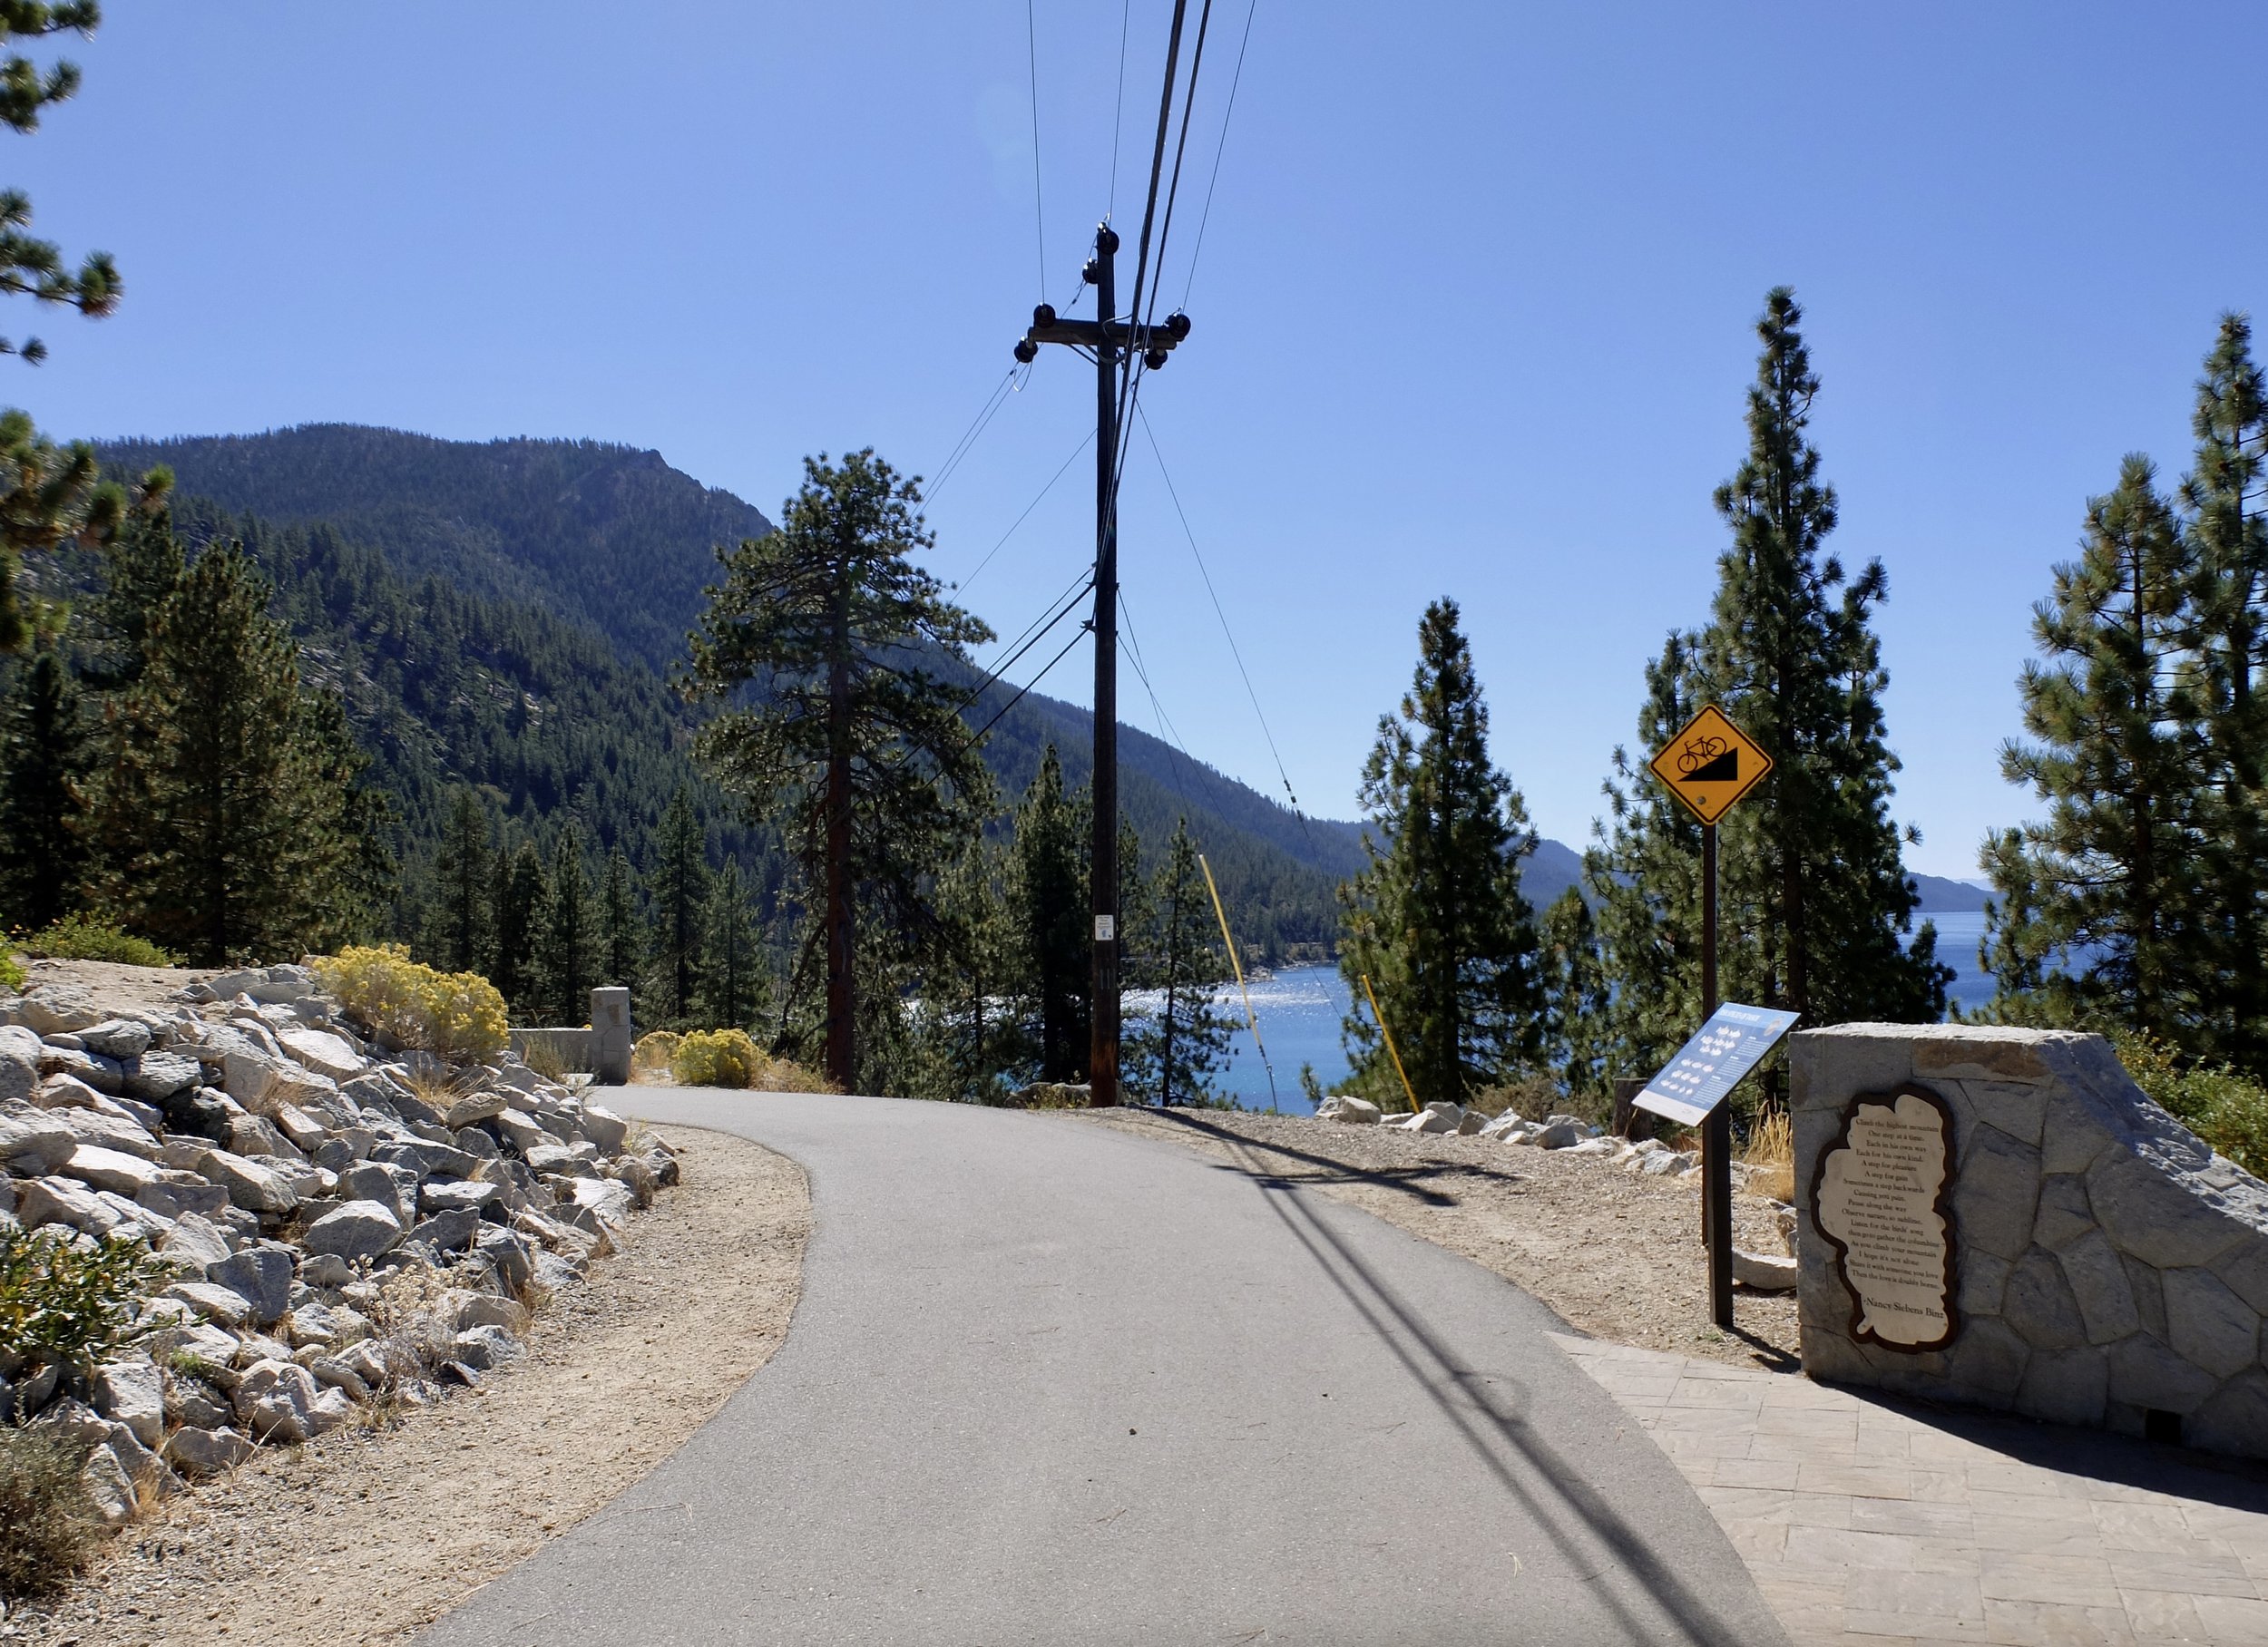  “This new trail system lies below the highway bordering Lake Tahoe’s eastern shoreline, providing unfiltered views &amp; incomparable access to Lake Tahoe.” 